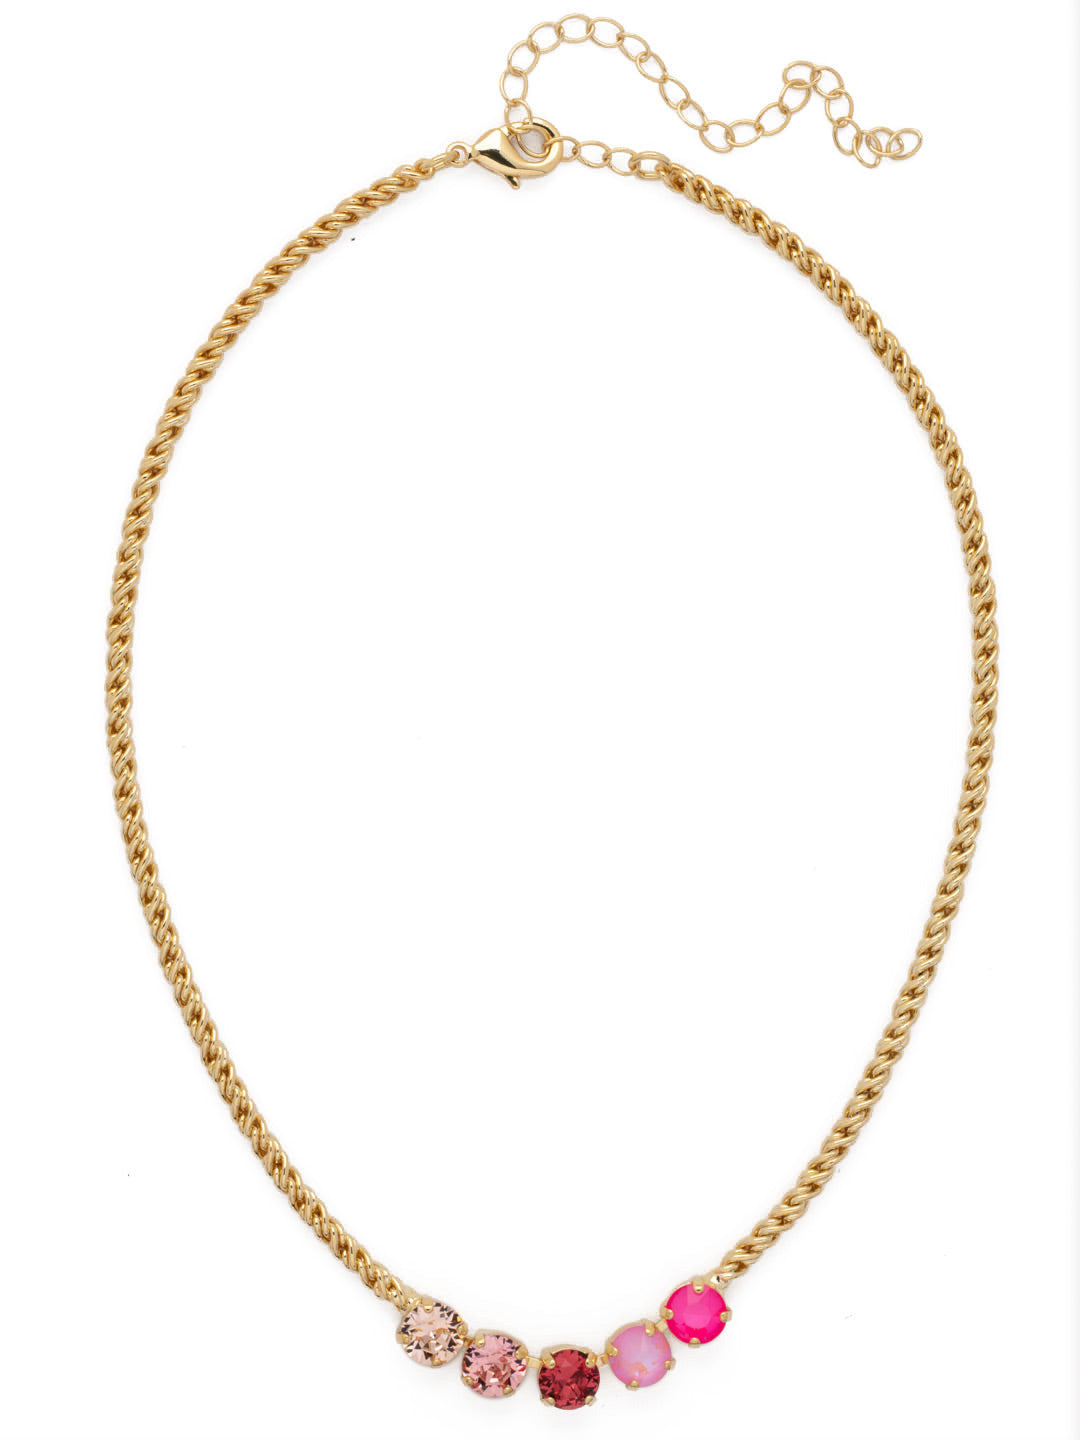 Shannon Tennis Necklace - NFL1BGBFL - <p>The Shannon Tennis Necklace features a line of five round cut crystals on an adjustable rope chain, secured by a lobster claw clasp. From Sorrelli's Big Flirt collection in our Bright Gold-tone finish.</p>